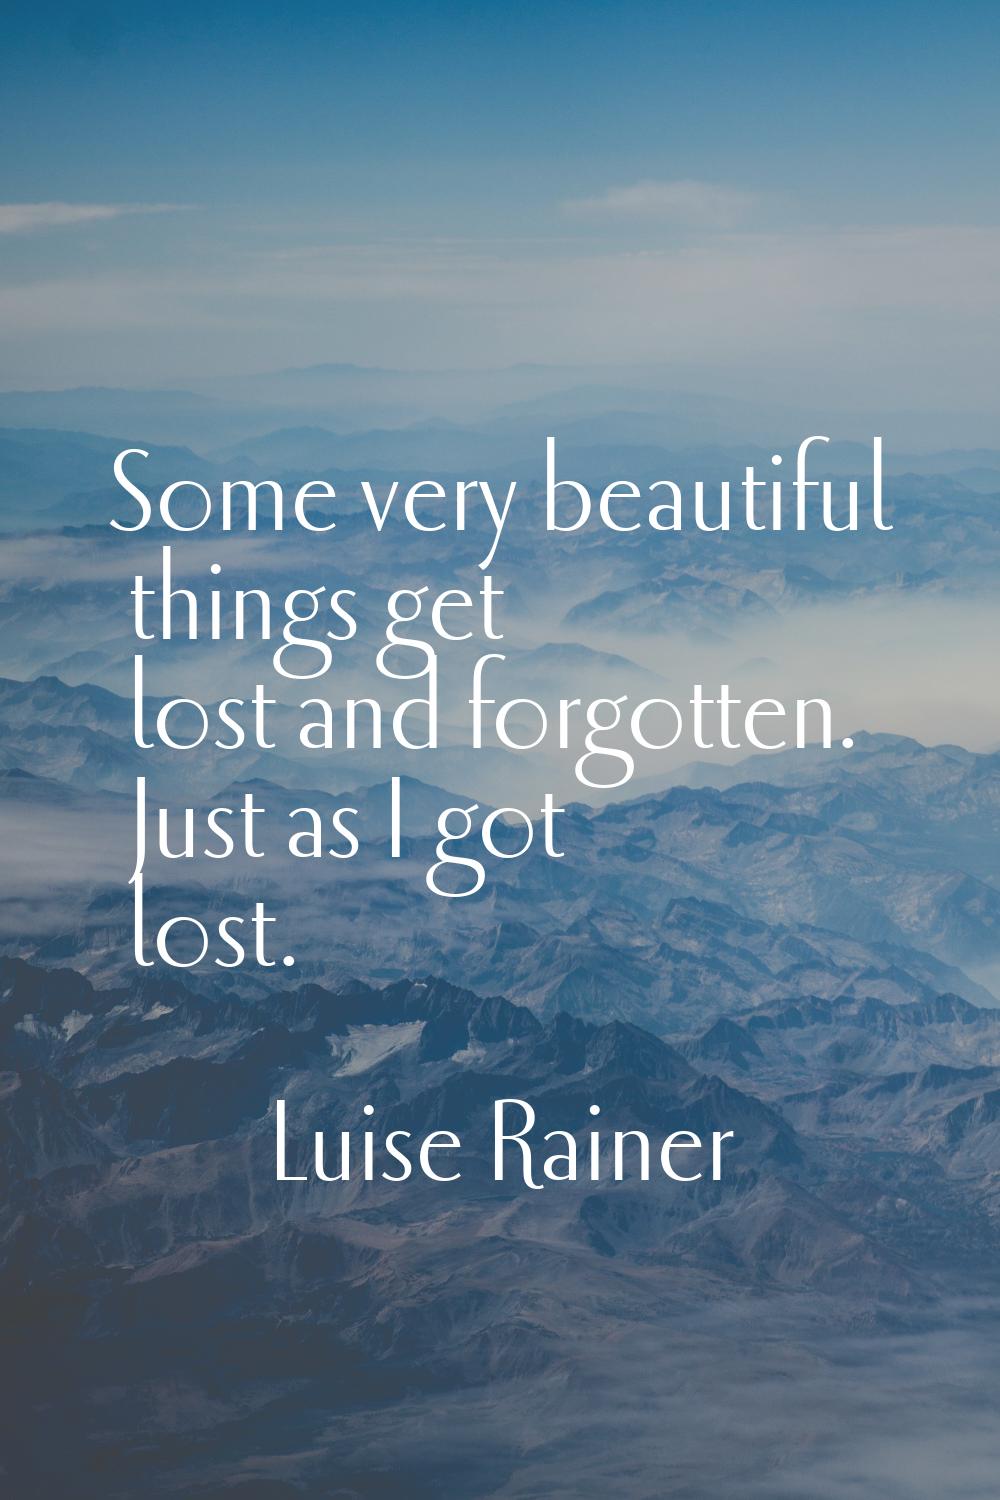 Some very beautiful things get lost and forgotten. Just as I got lost.